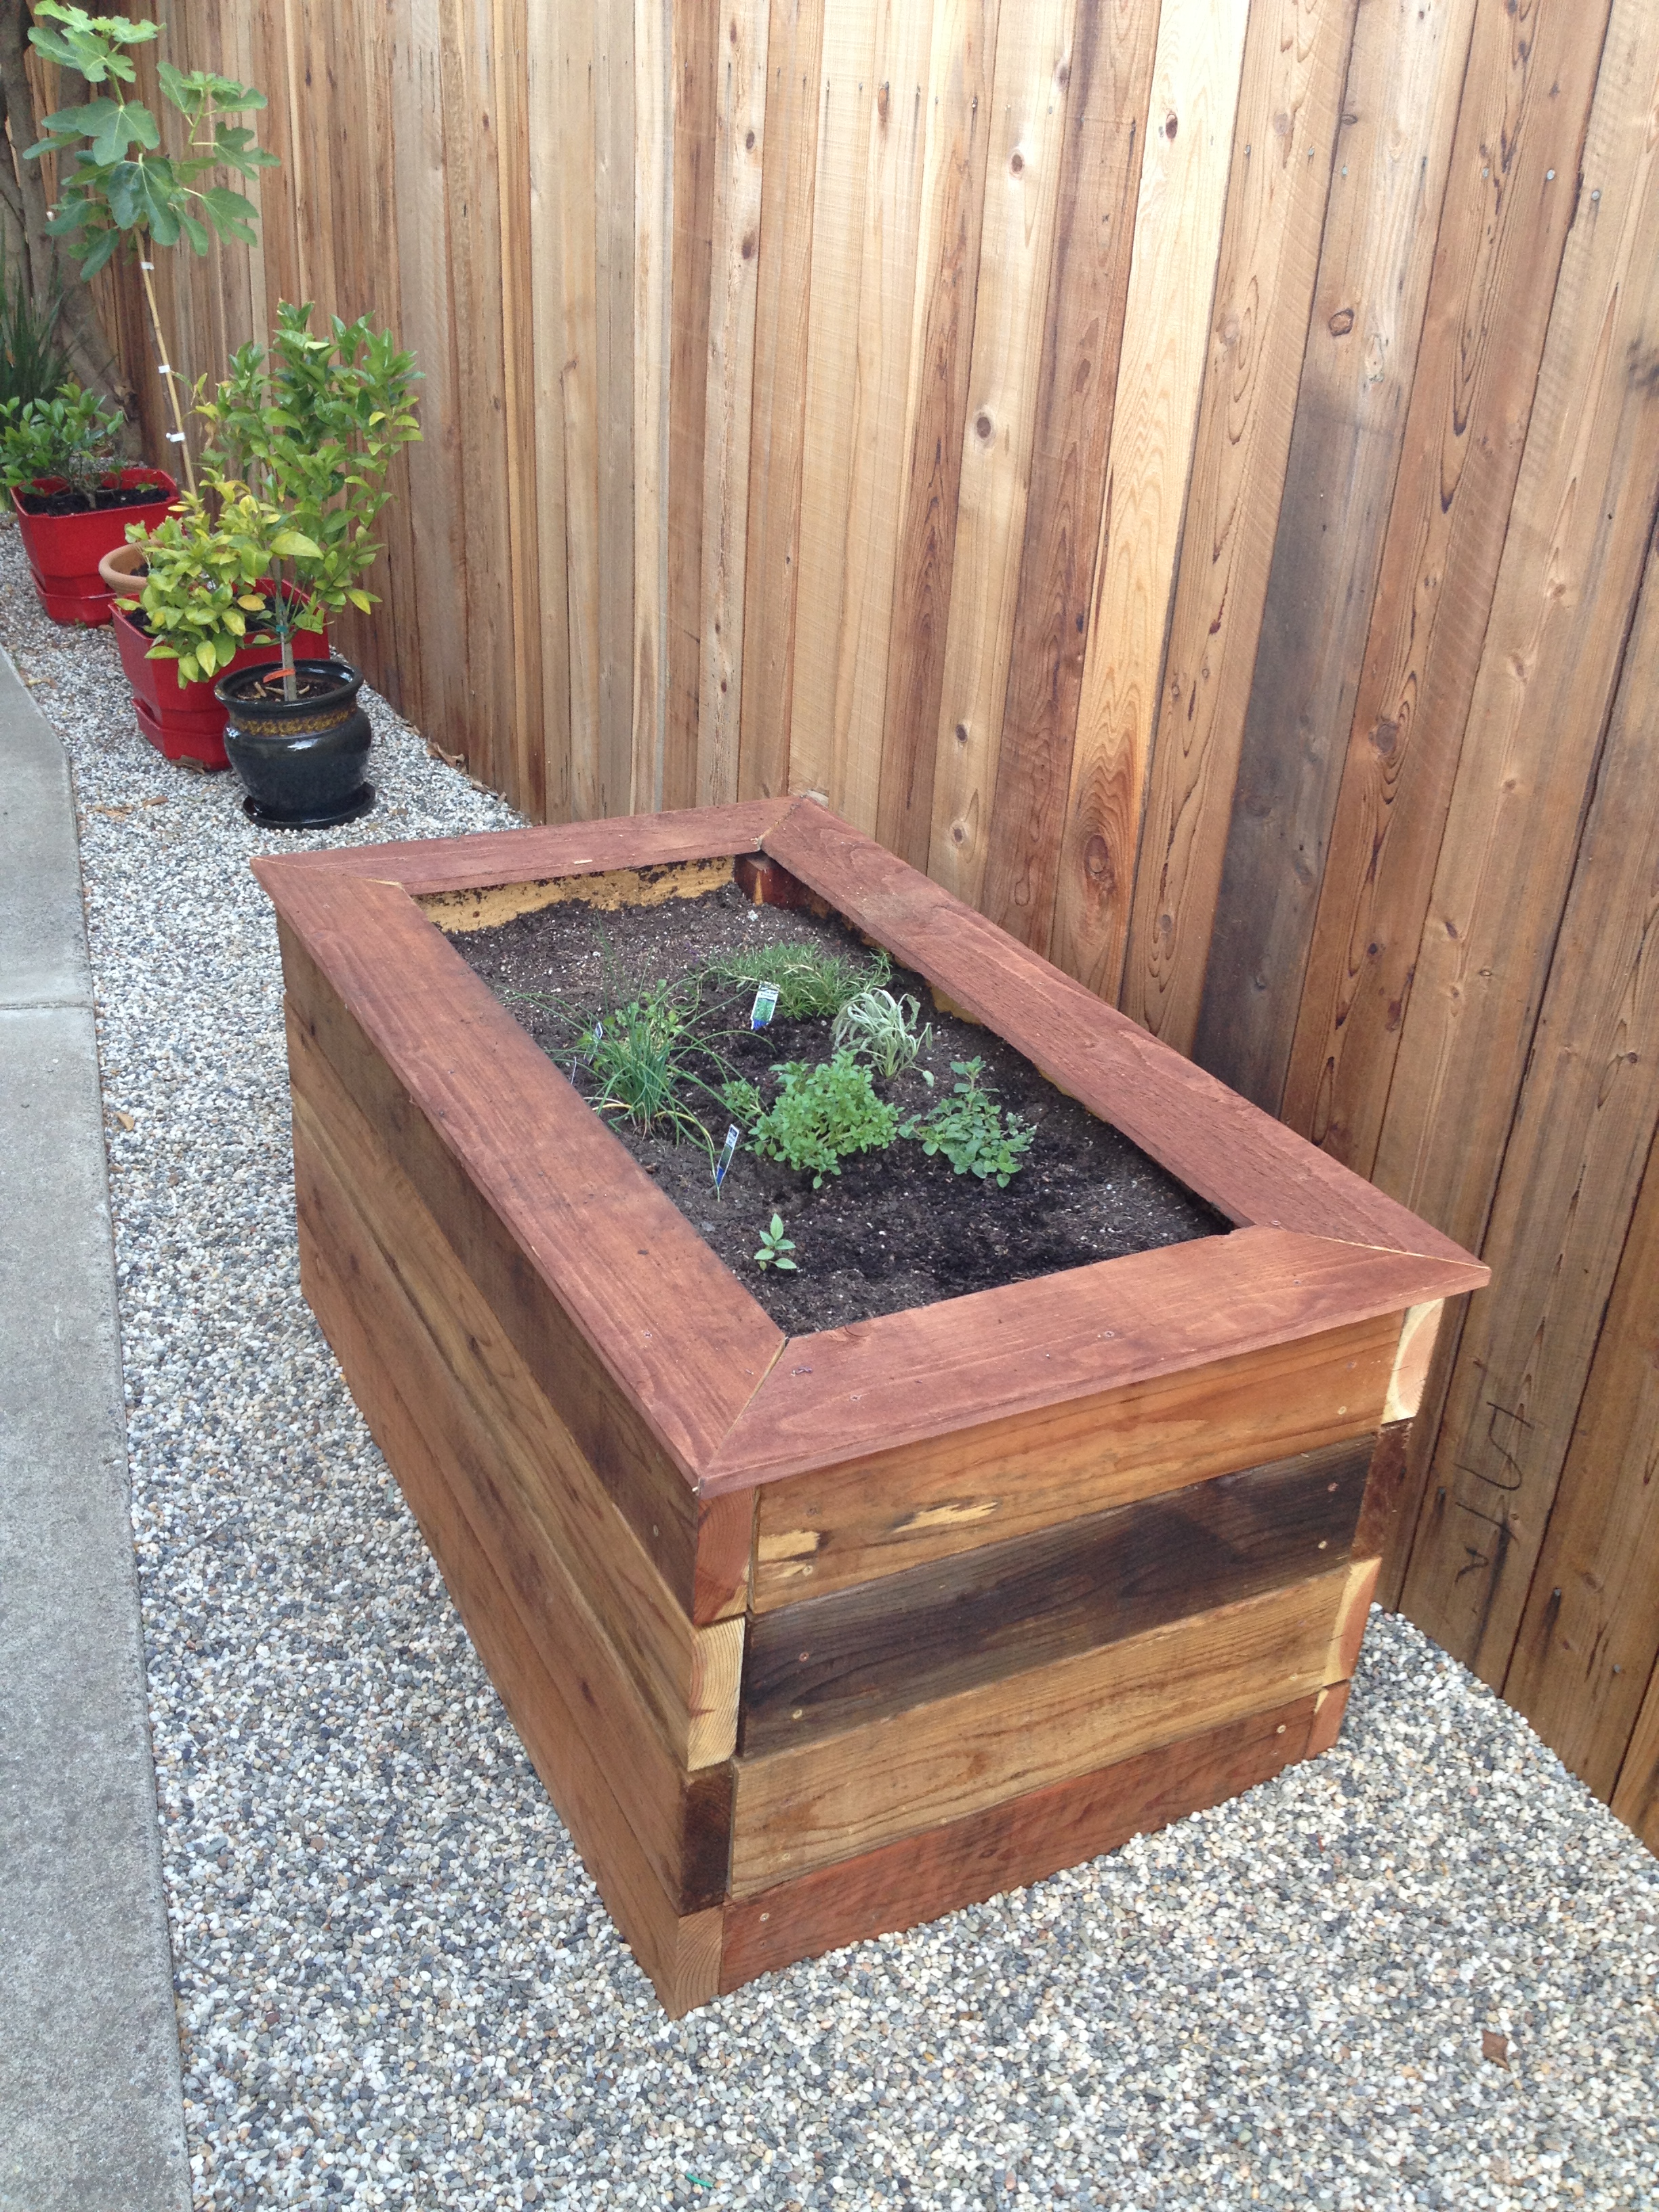 Woodworking: Raised Planter Box and Bench | Casa de Wade